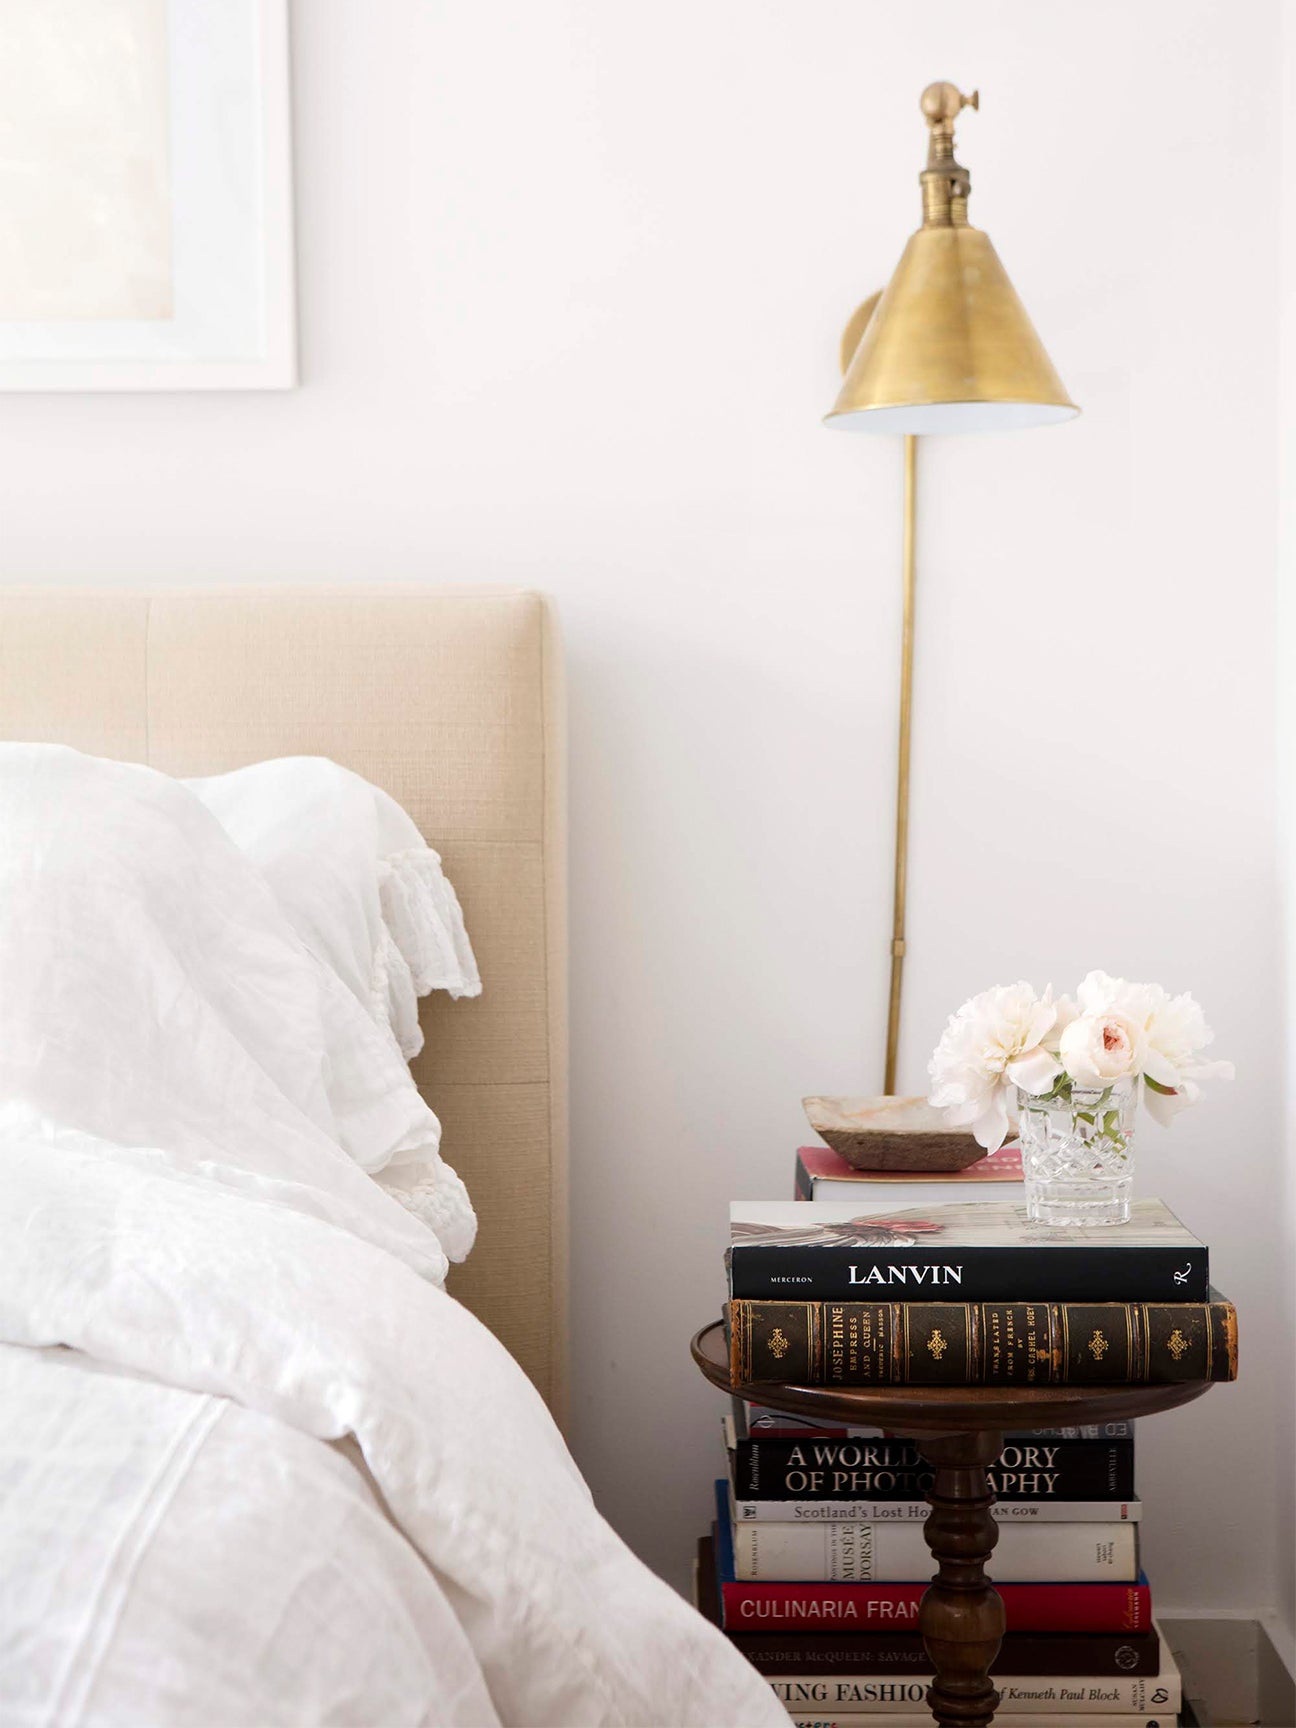 Bed and bedside table with pile of books